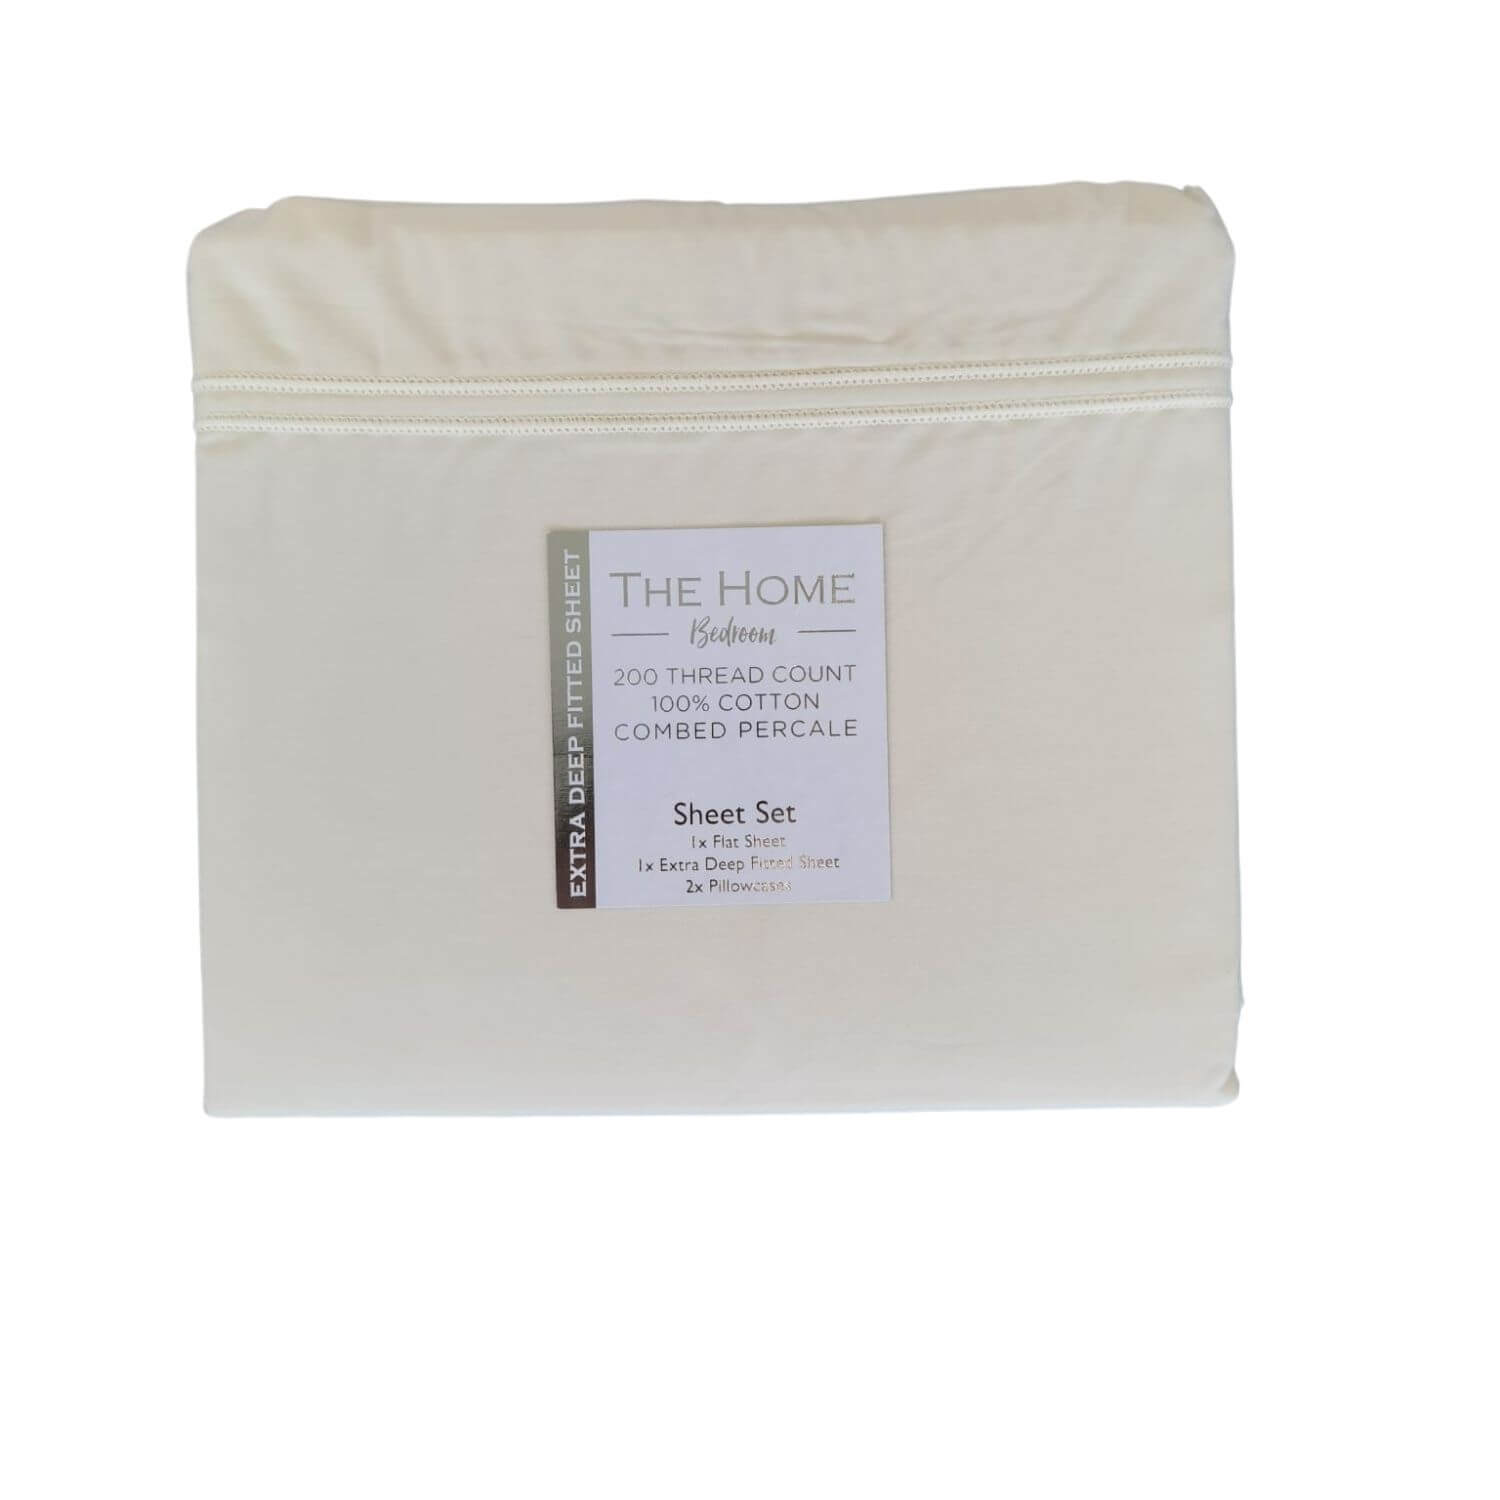 The Home Bedroom 200 Thread Count Extra Deep 100% Cotton Sheet Set - Cream 1 Shaws Department Stores